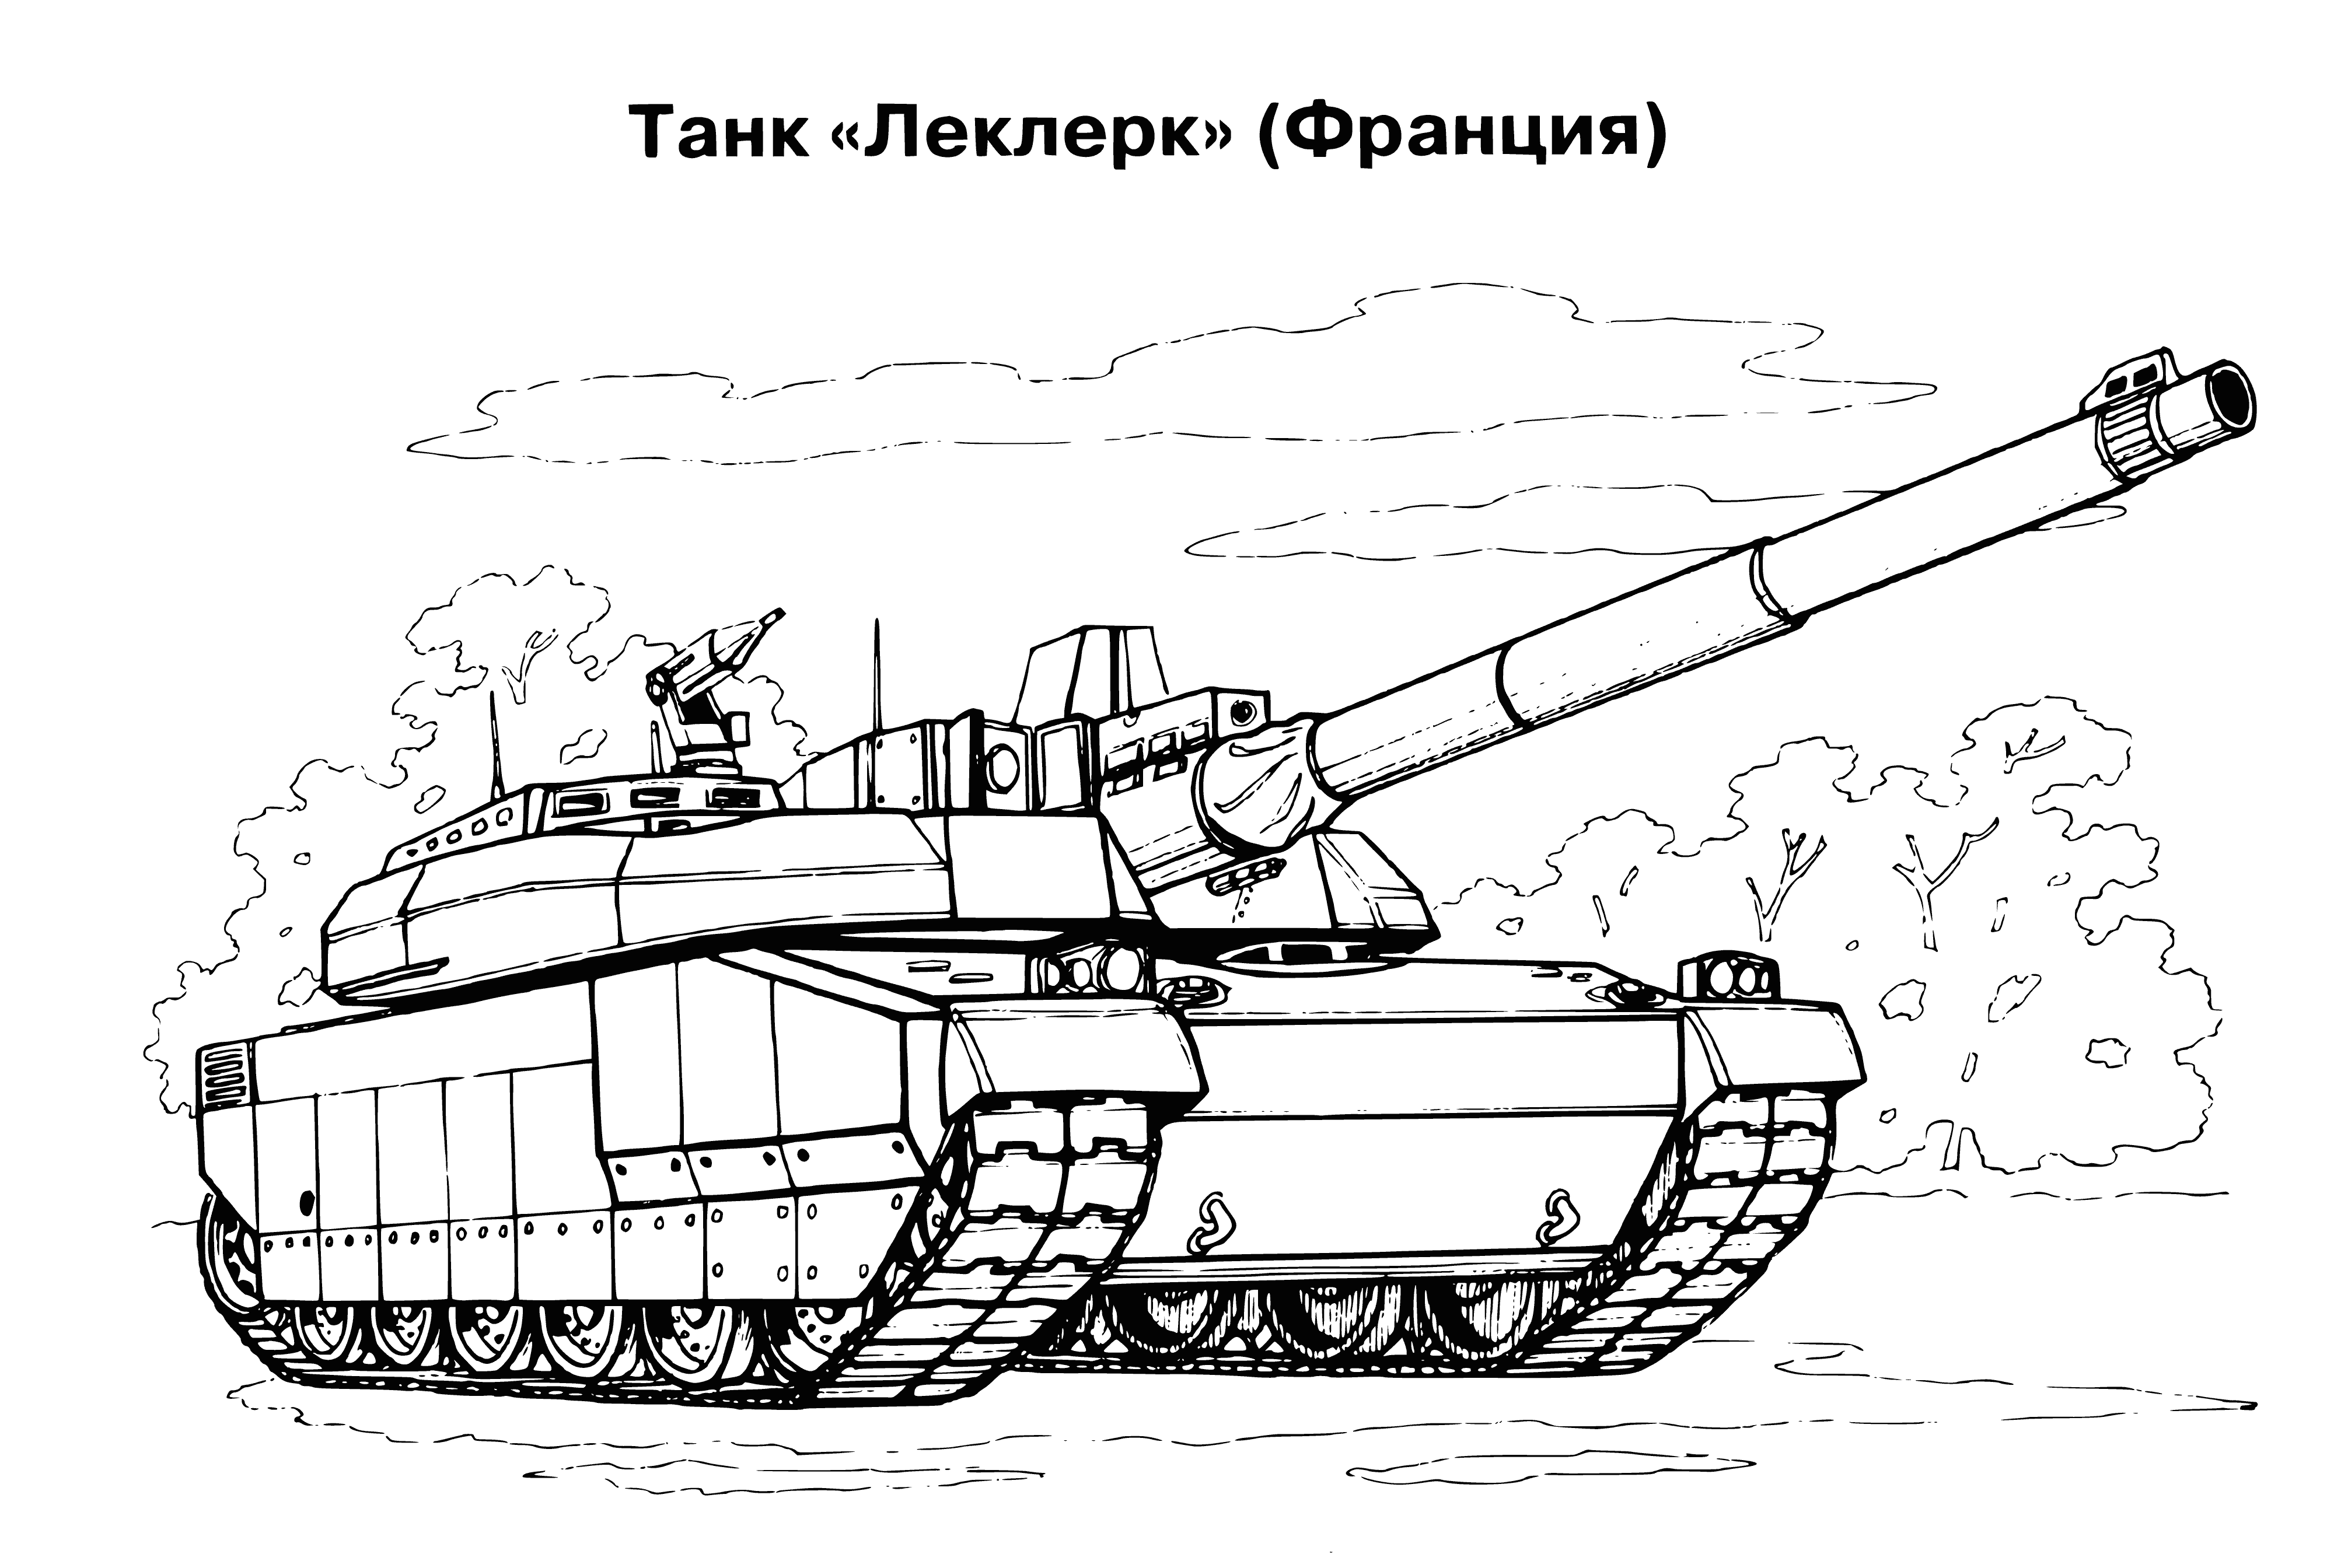 coloring page: Big green tank with turret, gun, windows, and caterpillar tracks in grassy field, surrounded by trees.